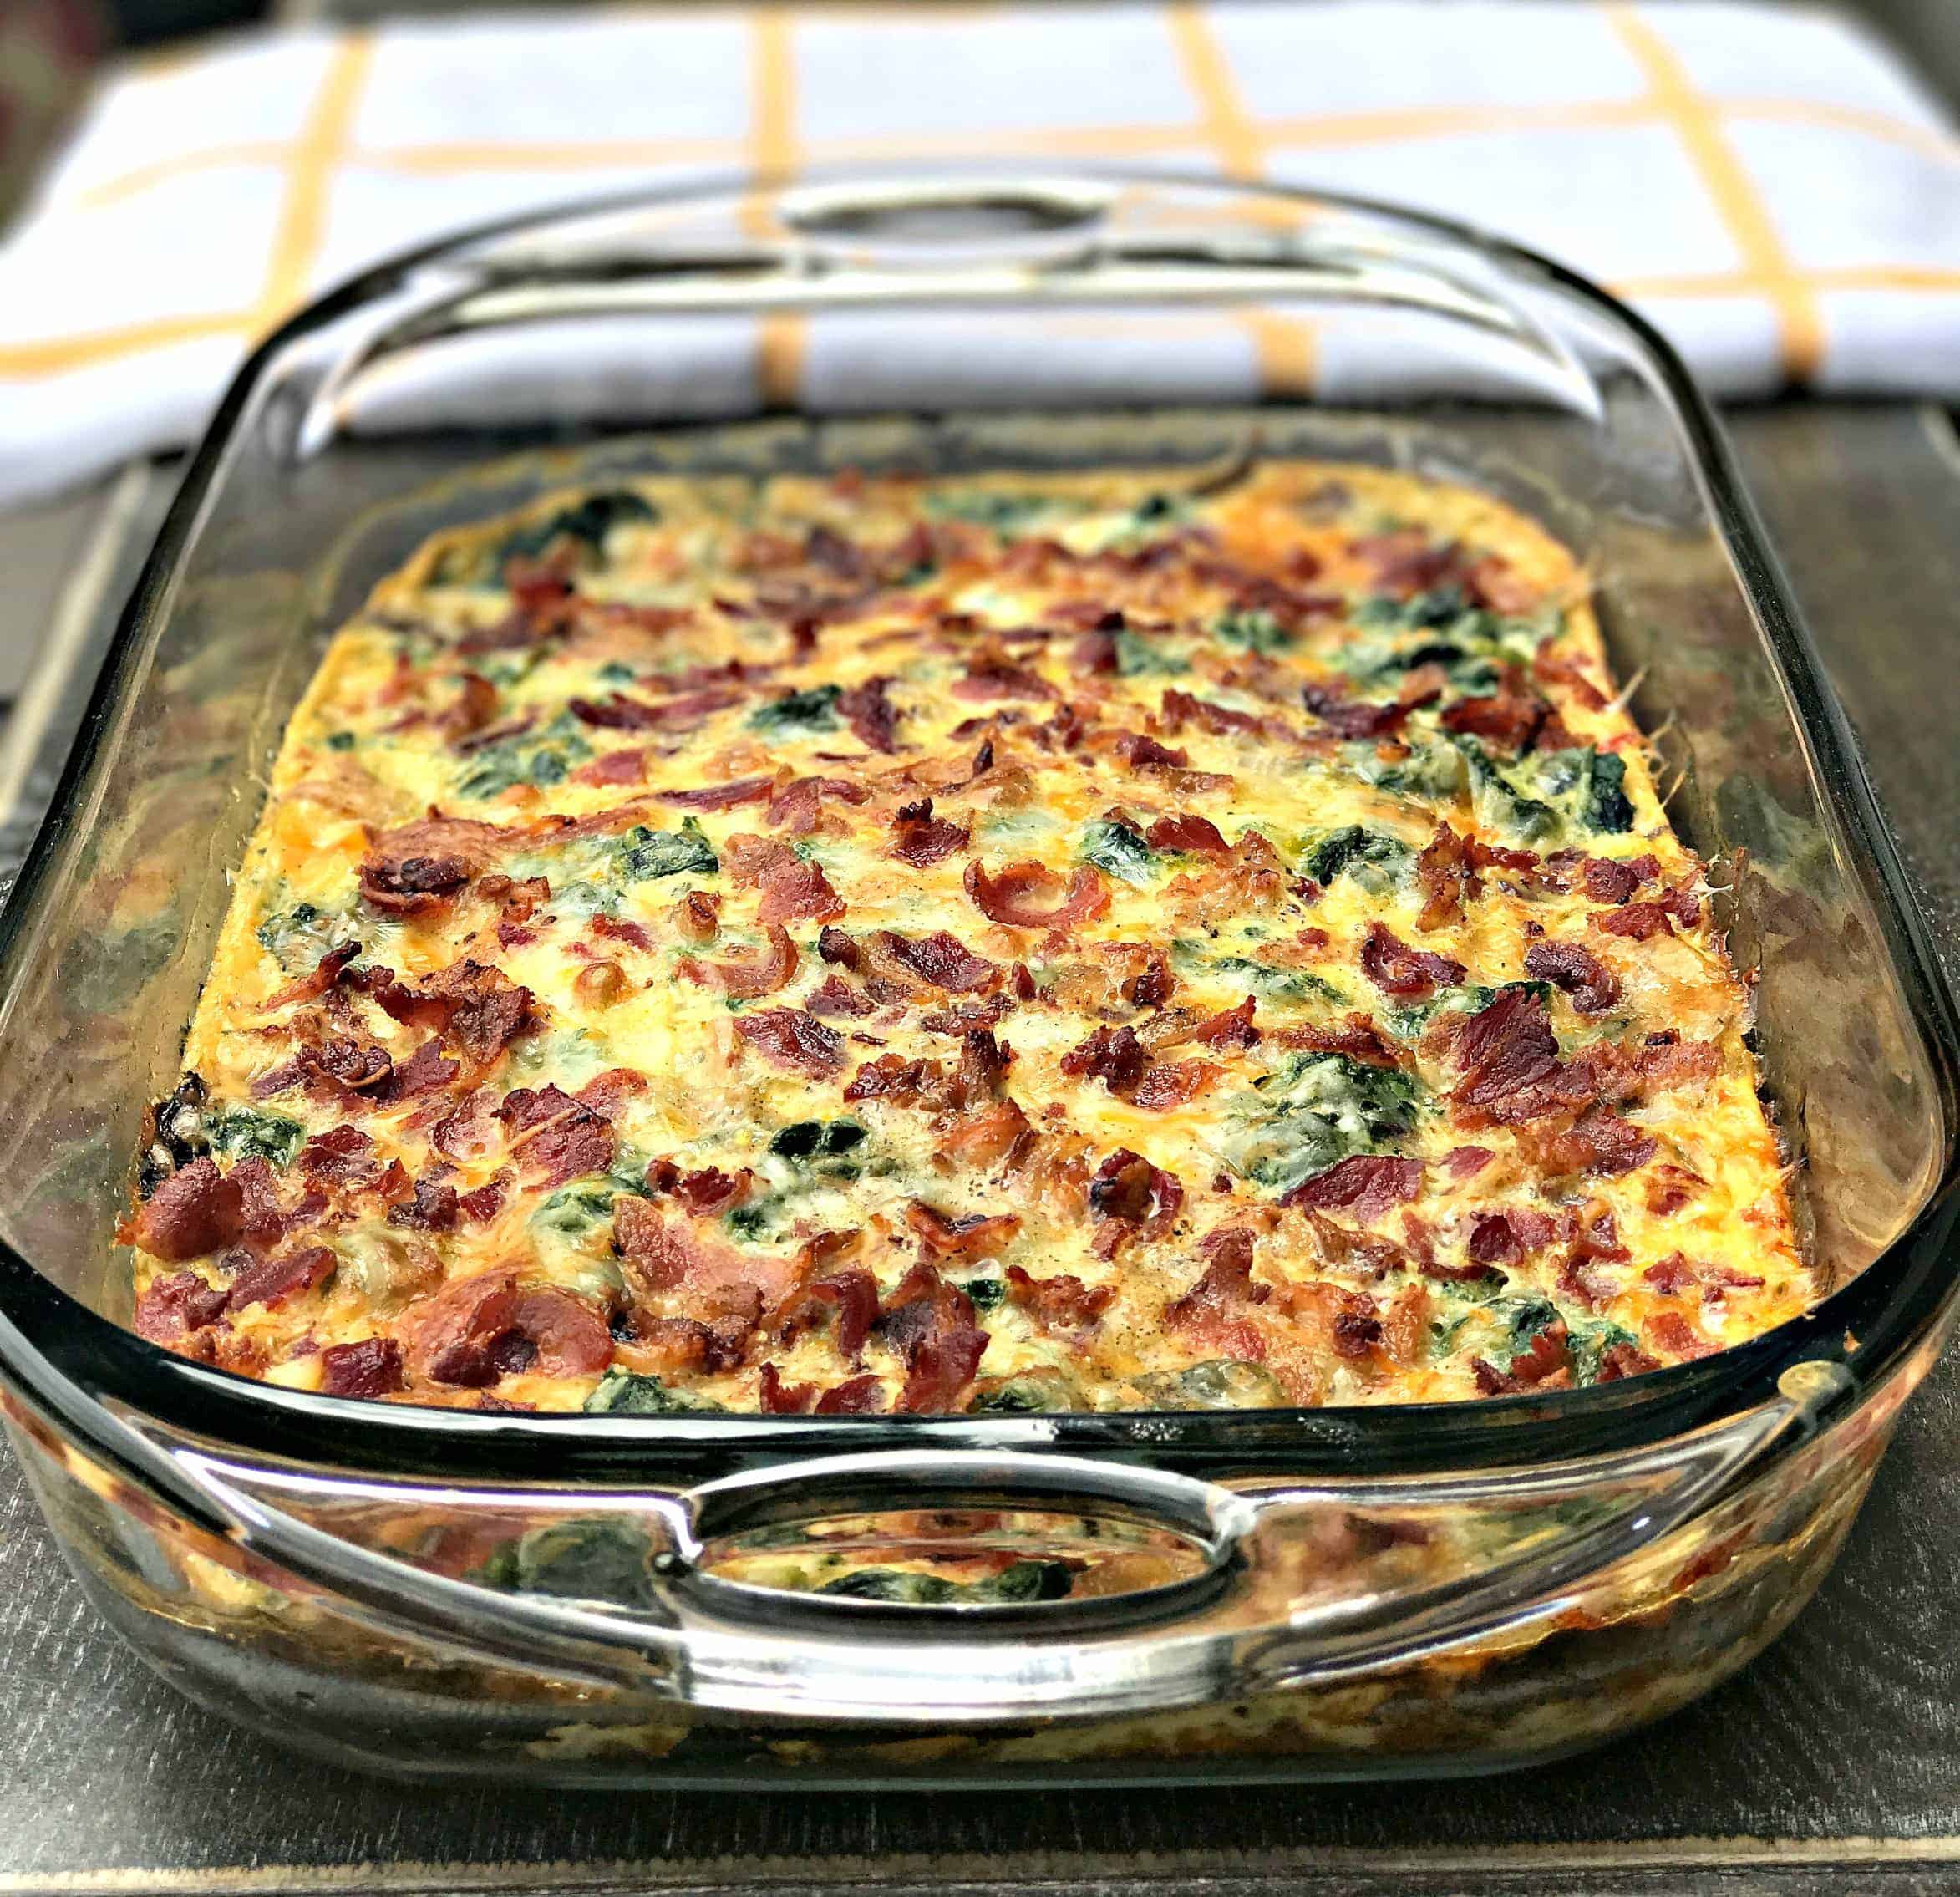 Bacon, Egg, and Spinach Breakfast Casserole in a glass baking dish